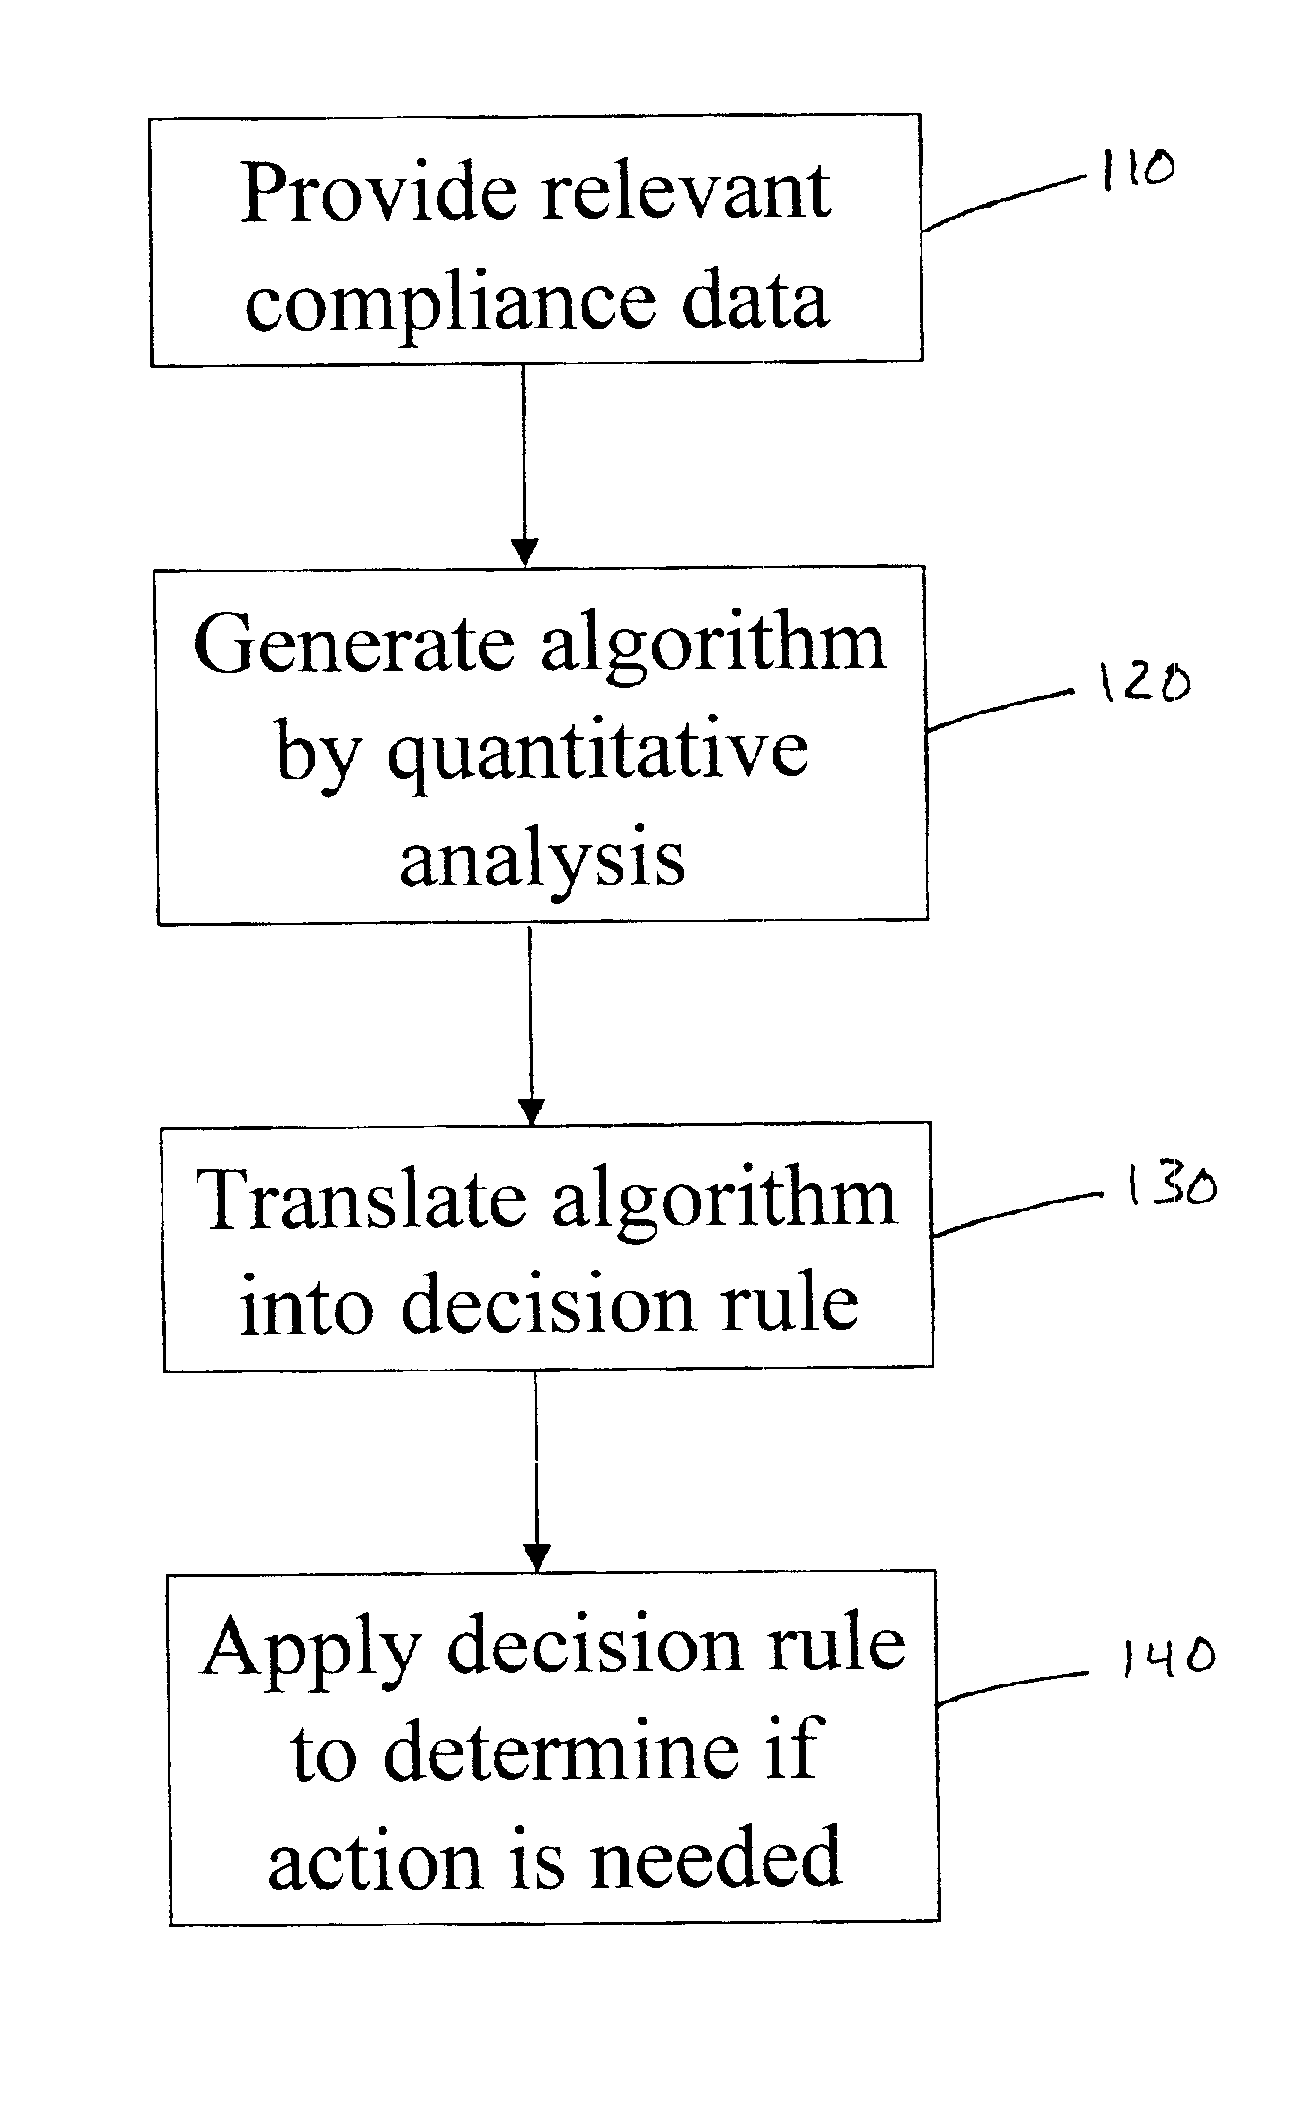 Apparatus and method for prediction and management of subject compliance in clinical research